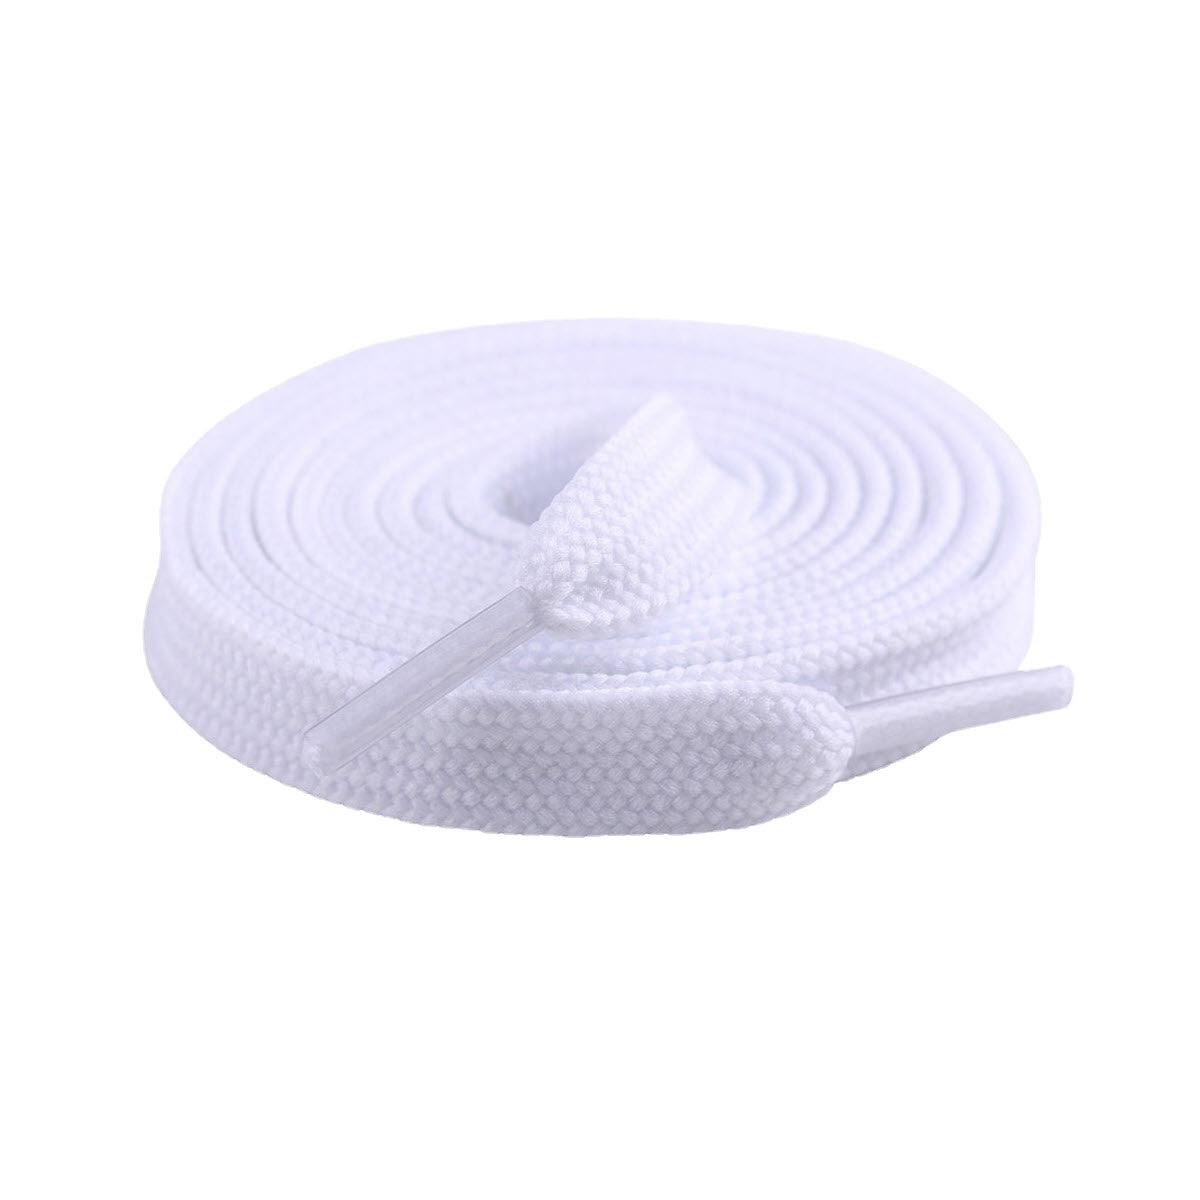 A coiled FRANKFORD LEATHER  54IN FLAT ATHLETIC LACE WHITE belt isolated on a white background.